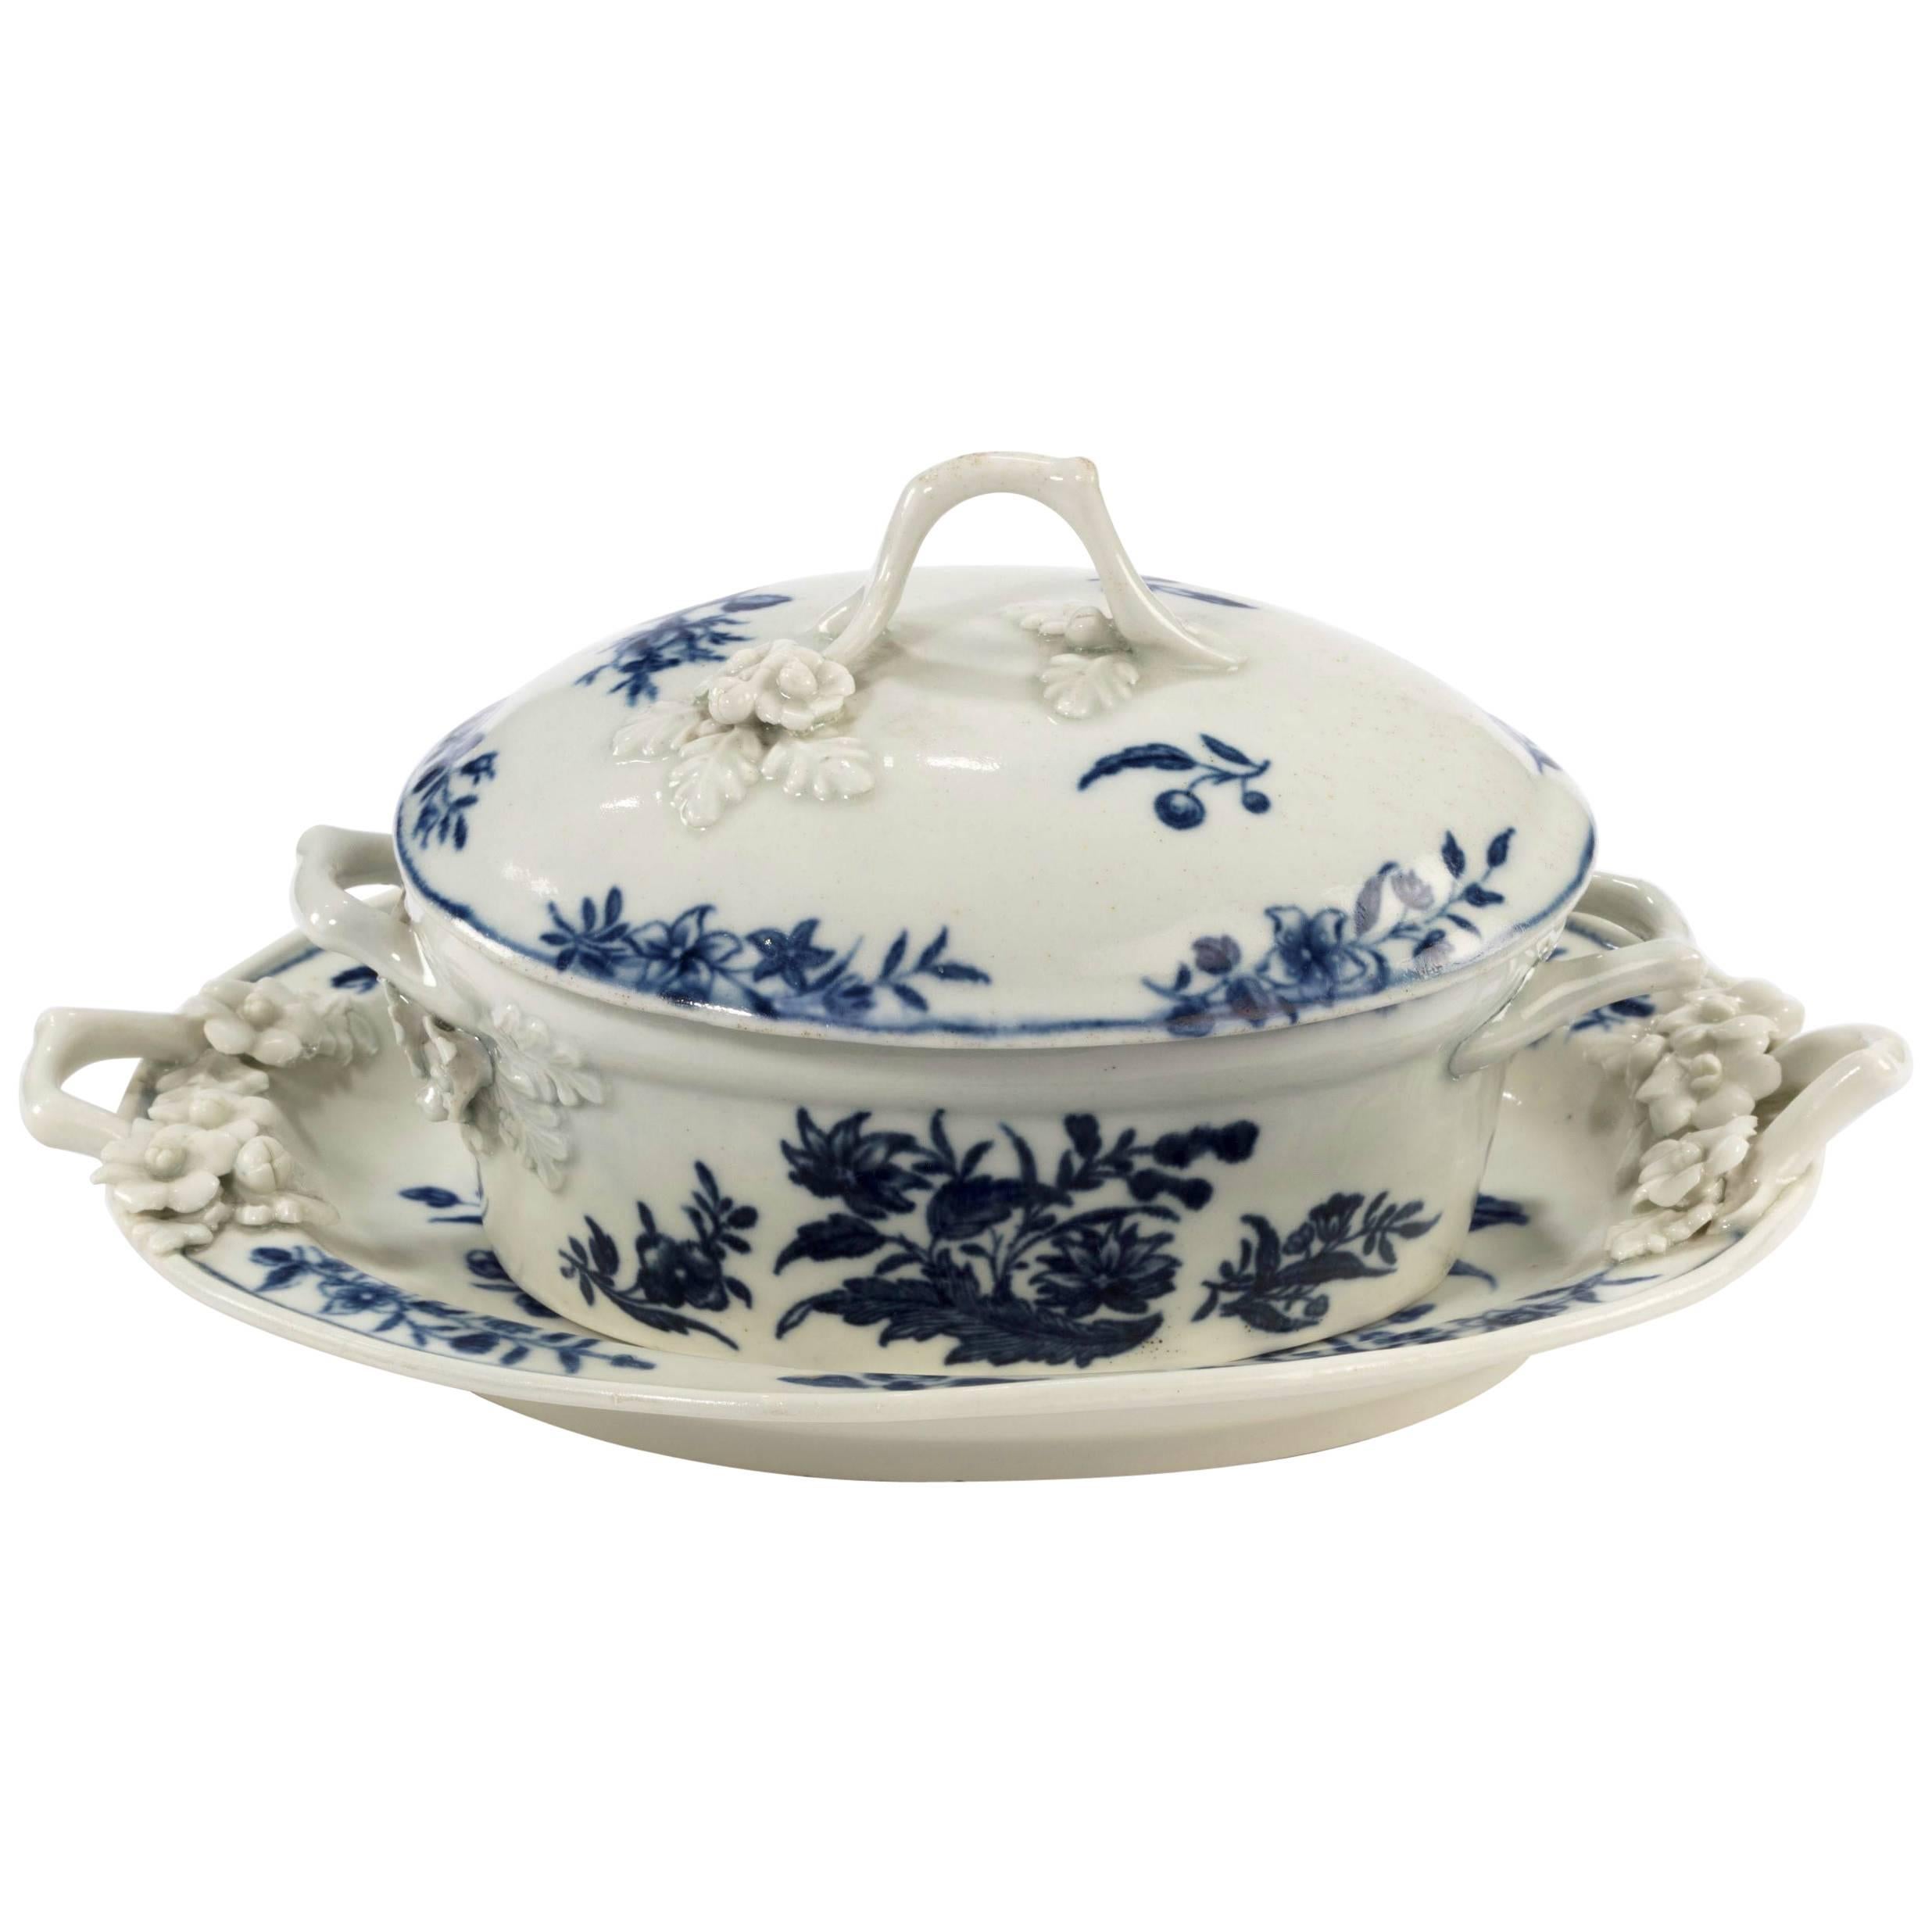 Late 18th Century, Worcester Blue and White Printed Oval Butter Tub